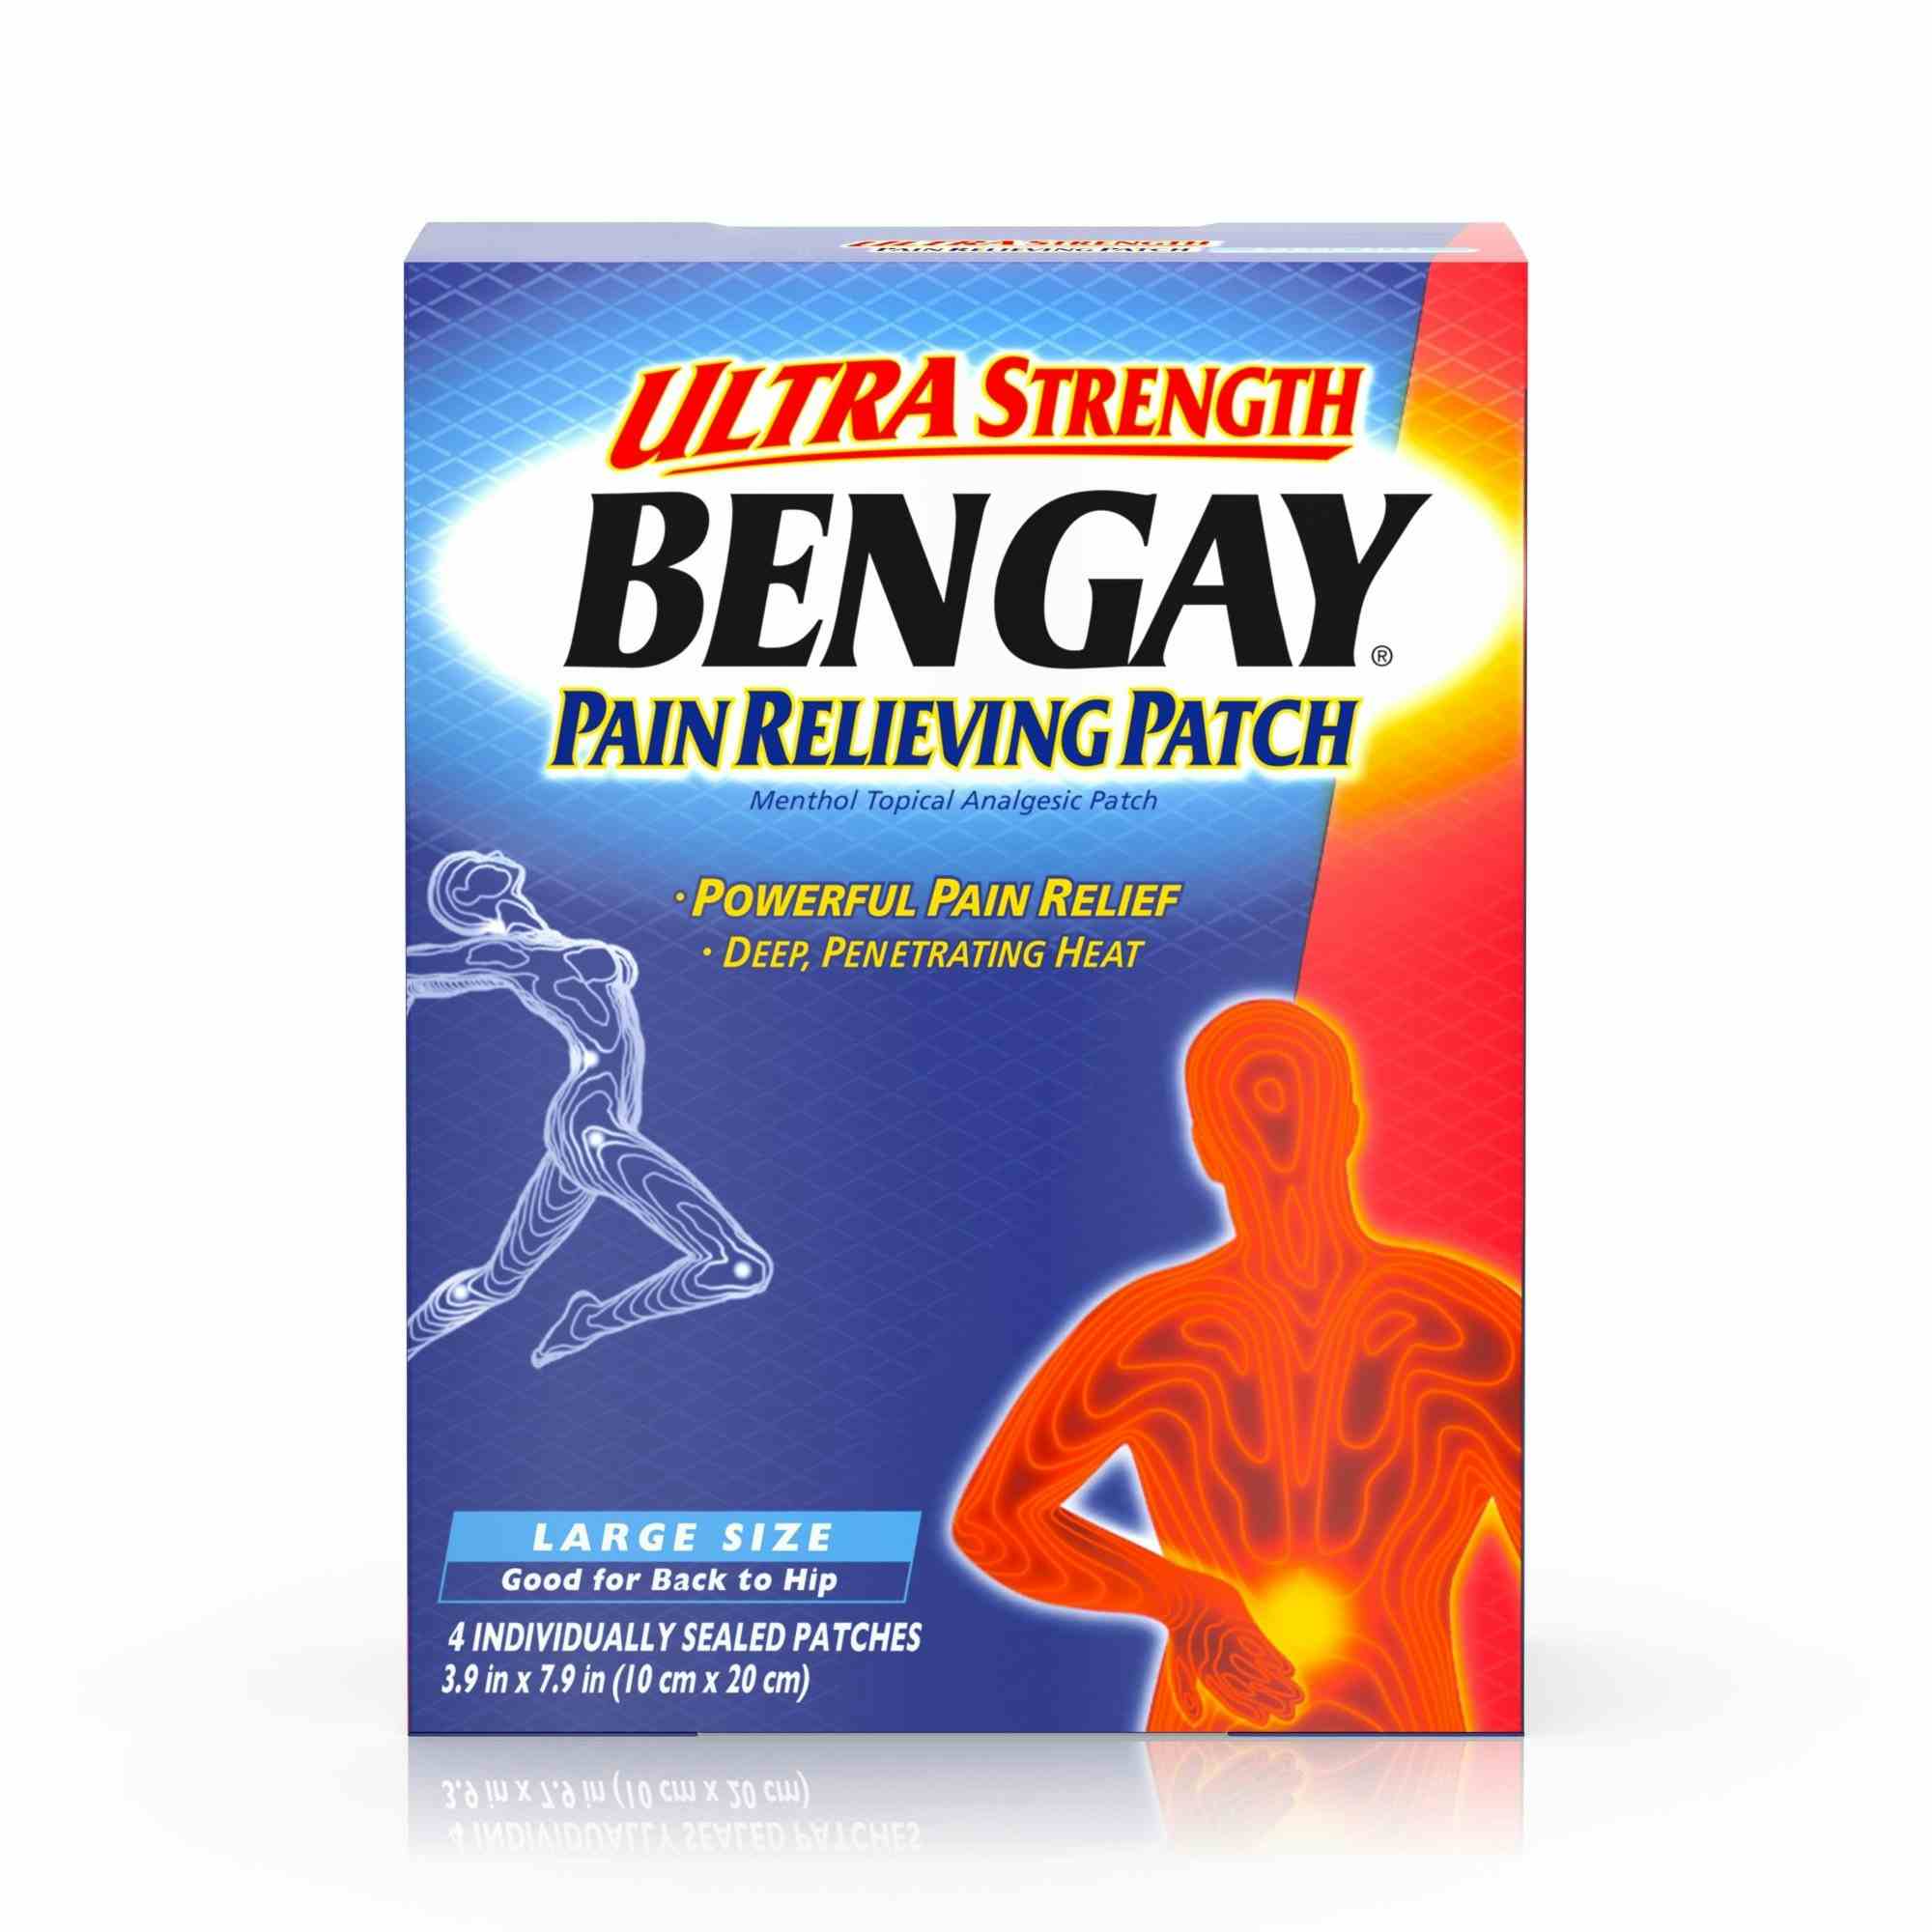 Bengay Pain Relieving Patch, Ultra Strength, 10074300081493, Box of 4